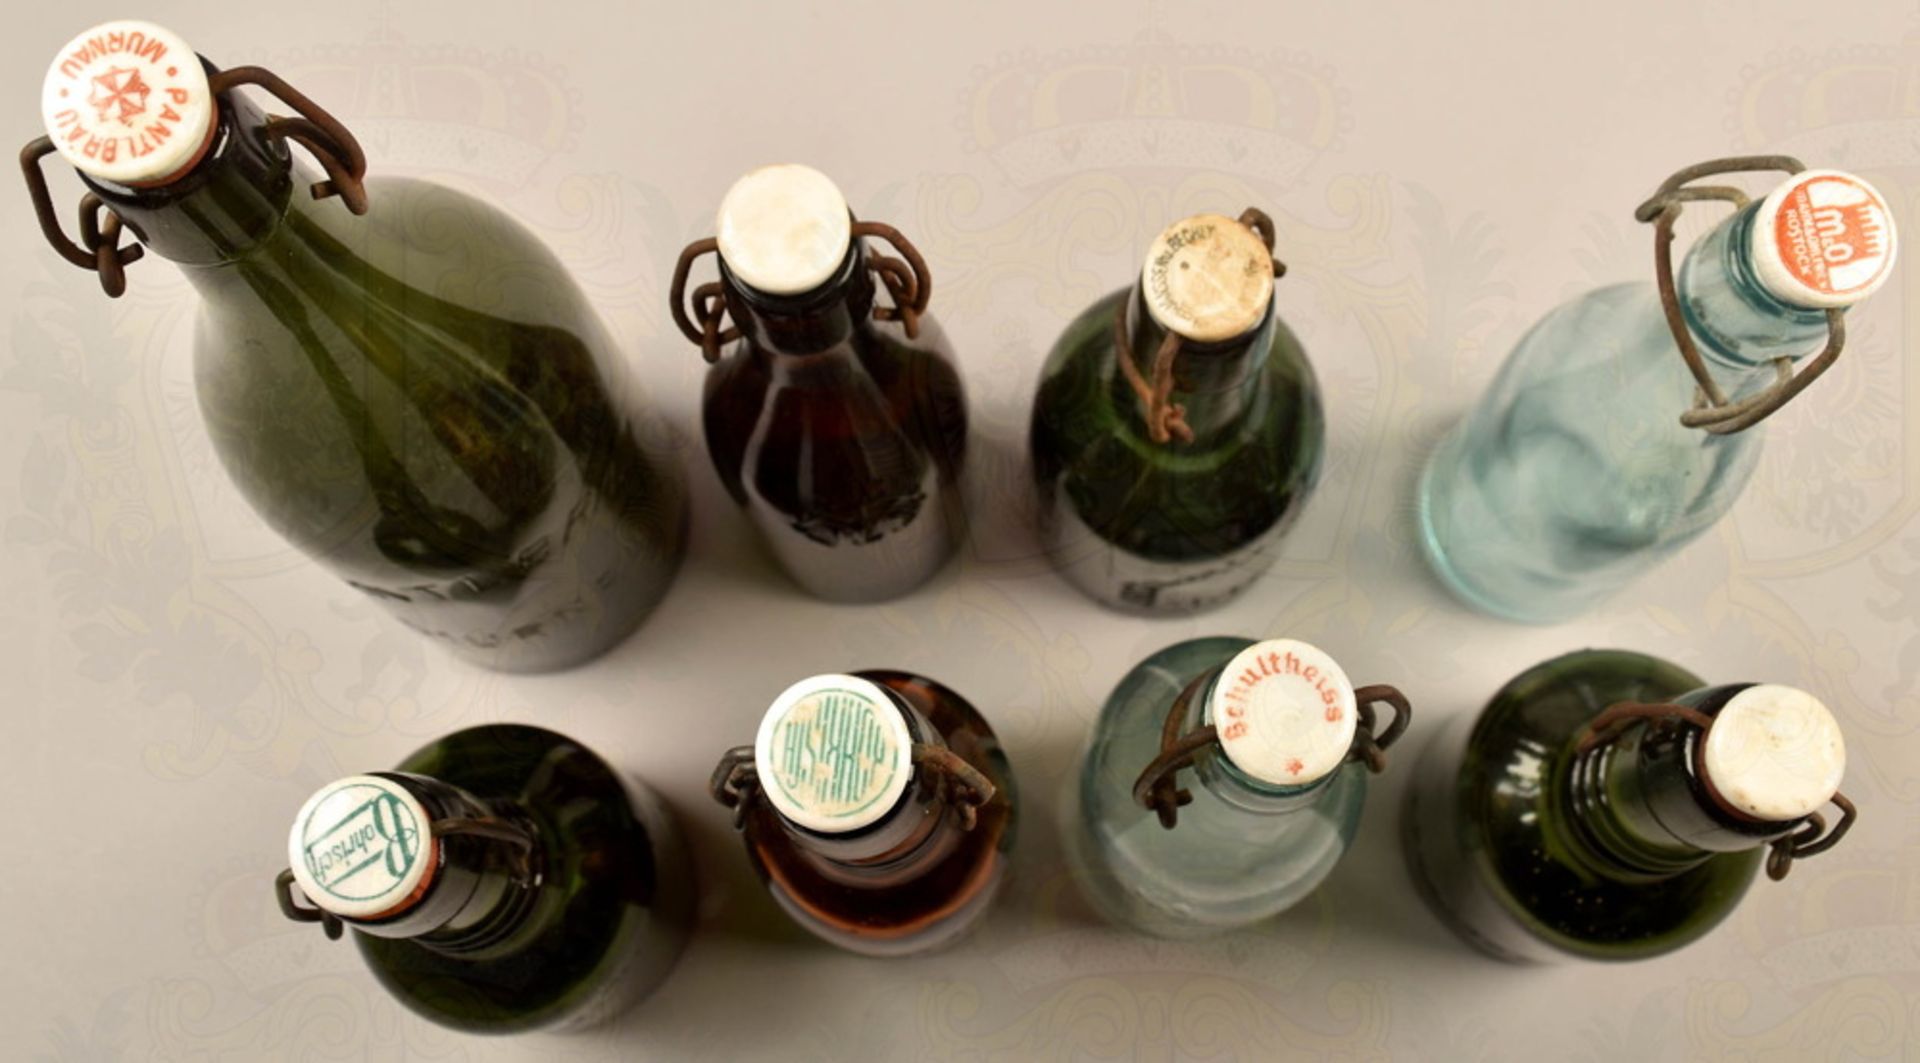 8 German glass bottles with porcelain caps 1920s-1950s - Image 2 of 2